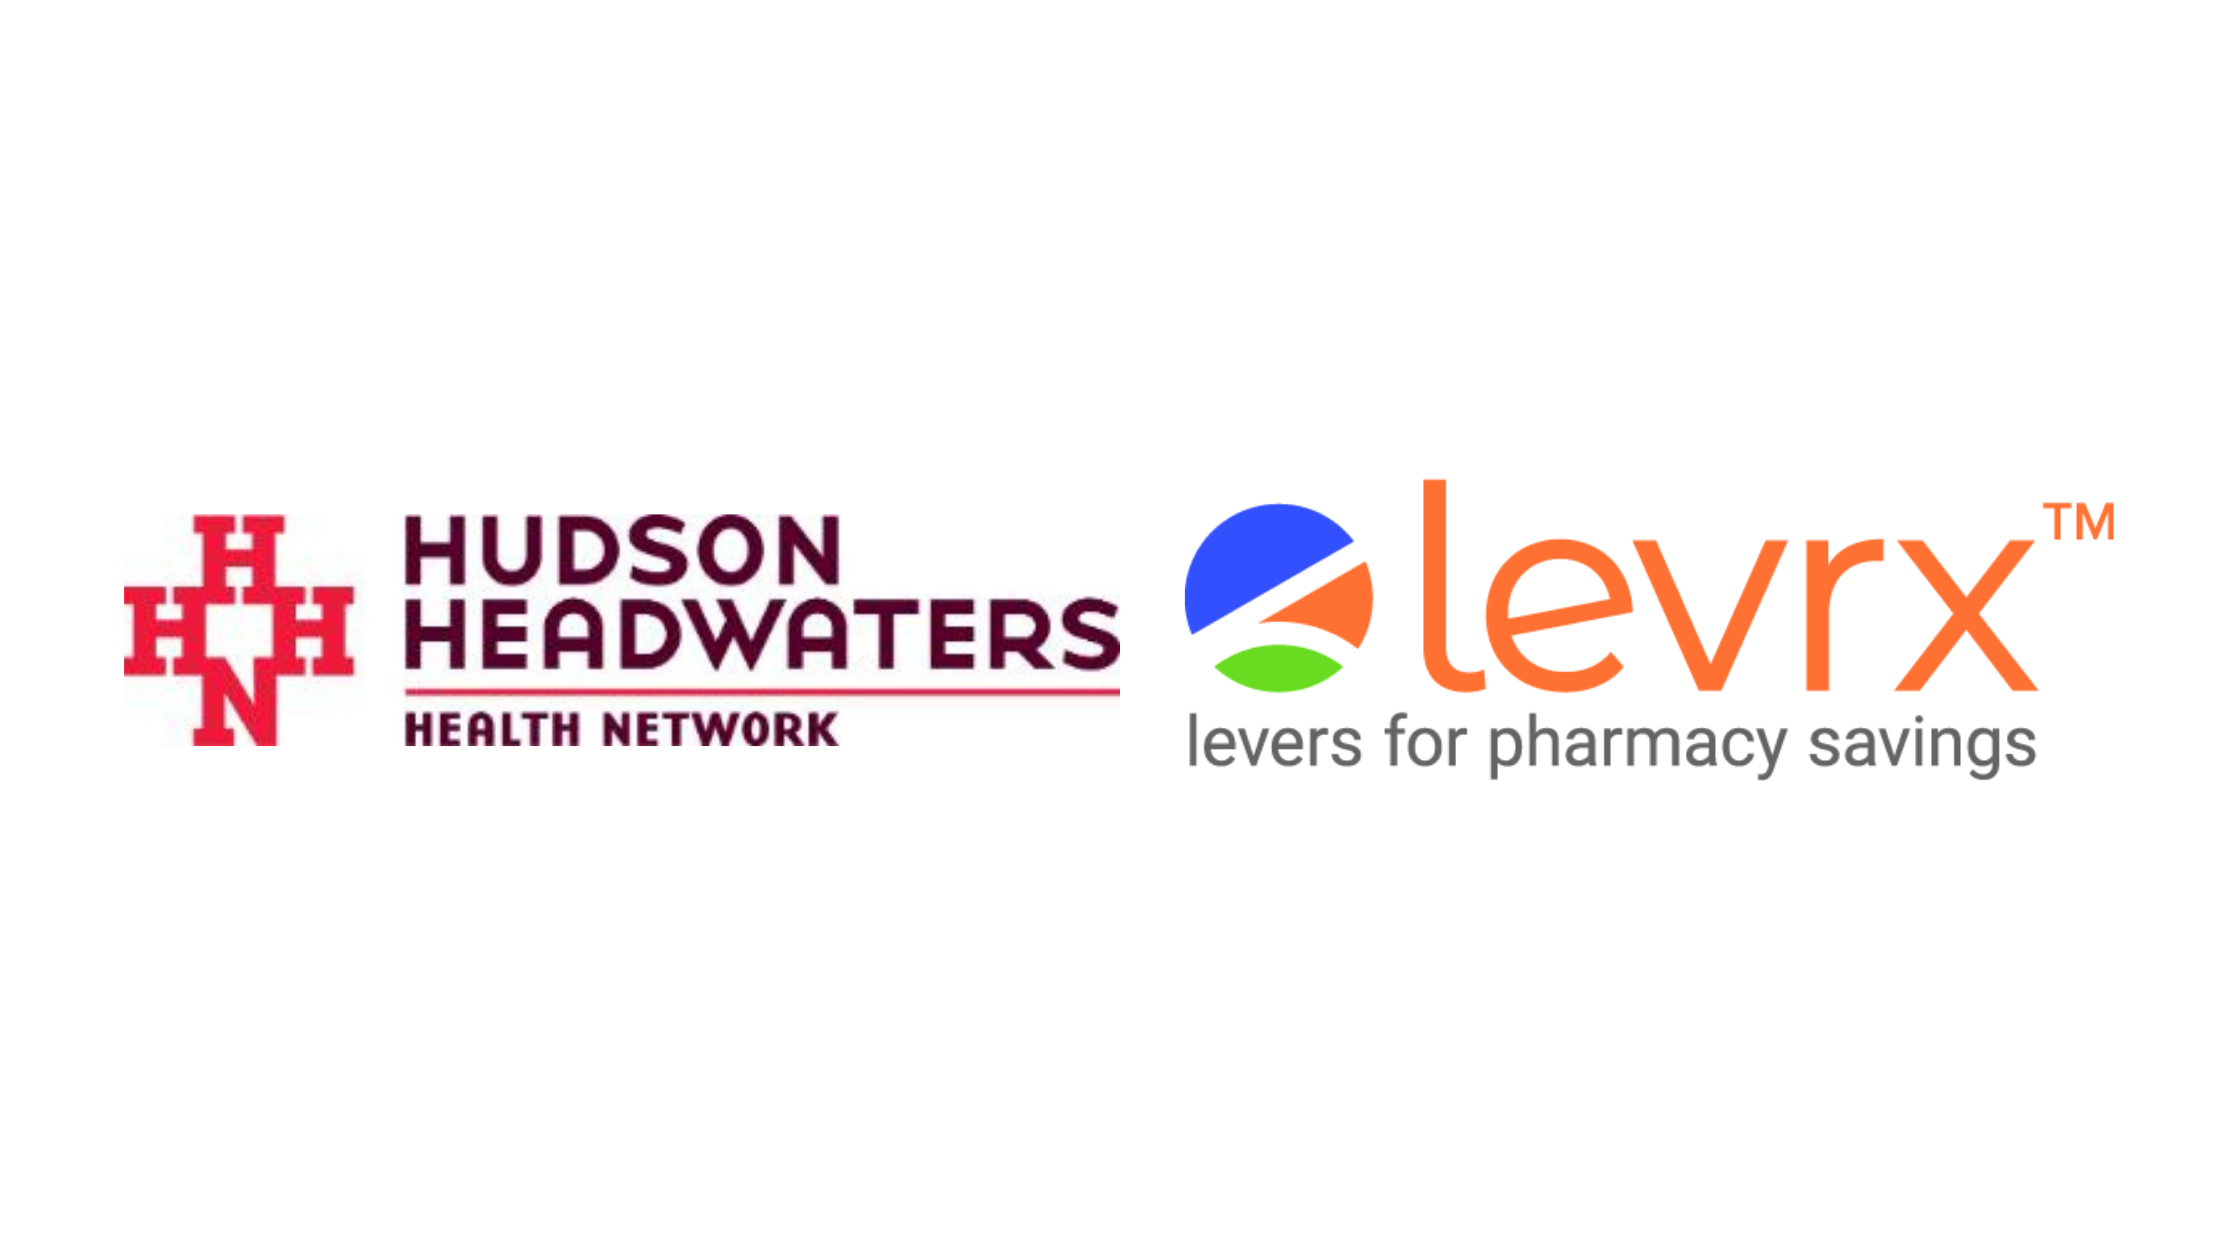 HHN and Levrx Partner to Lower Employees' Drug Costs